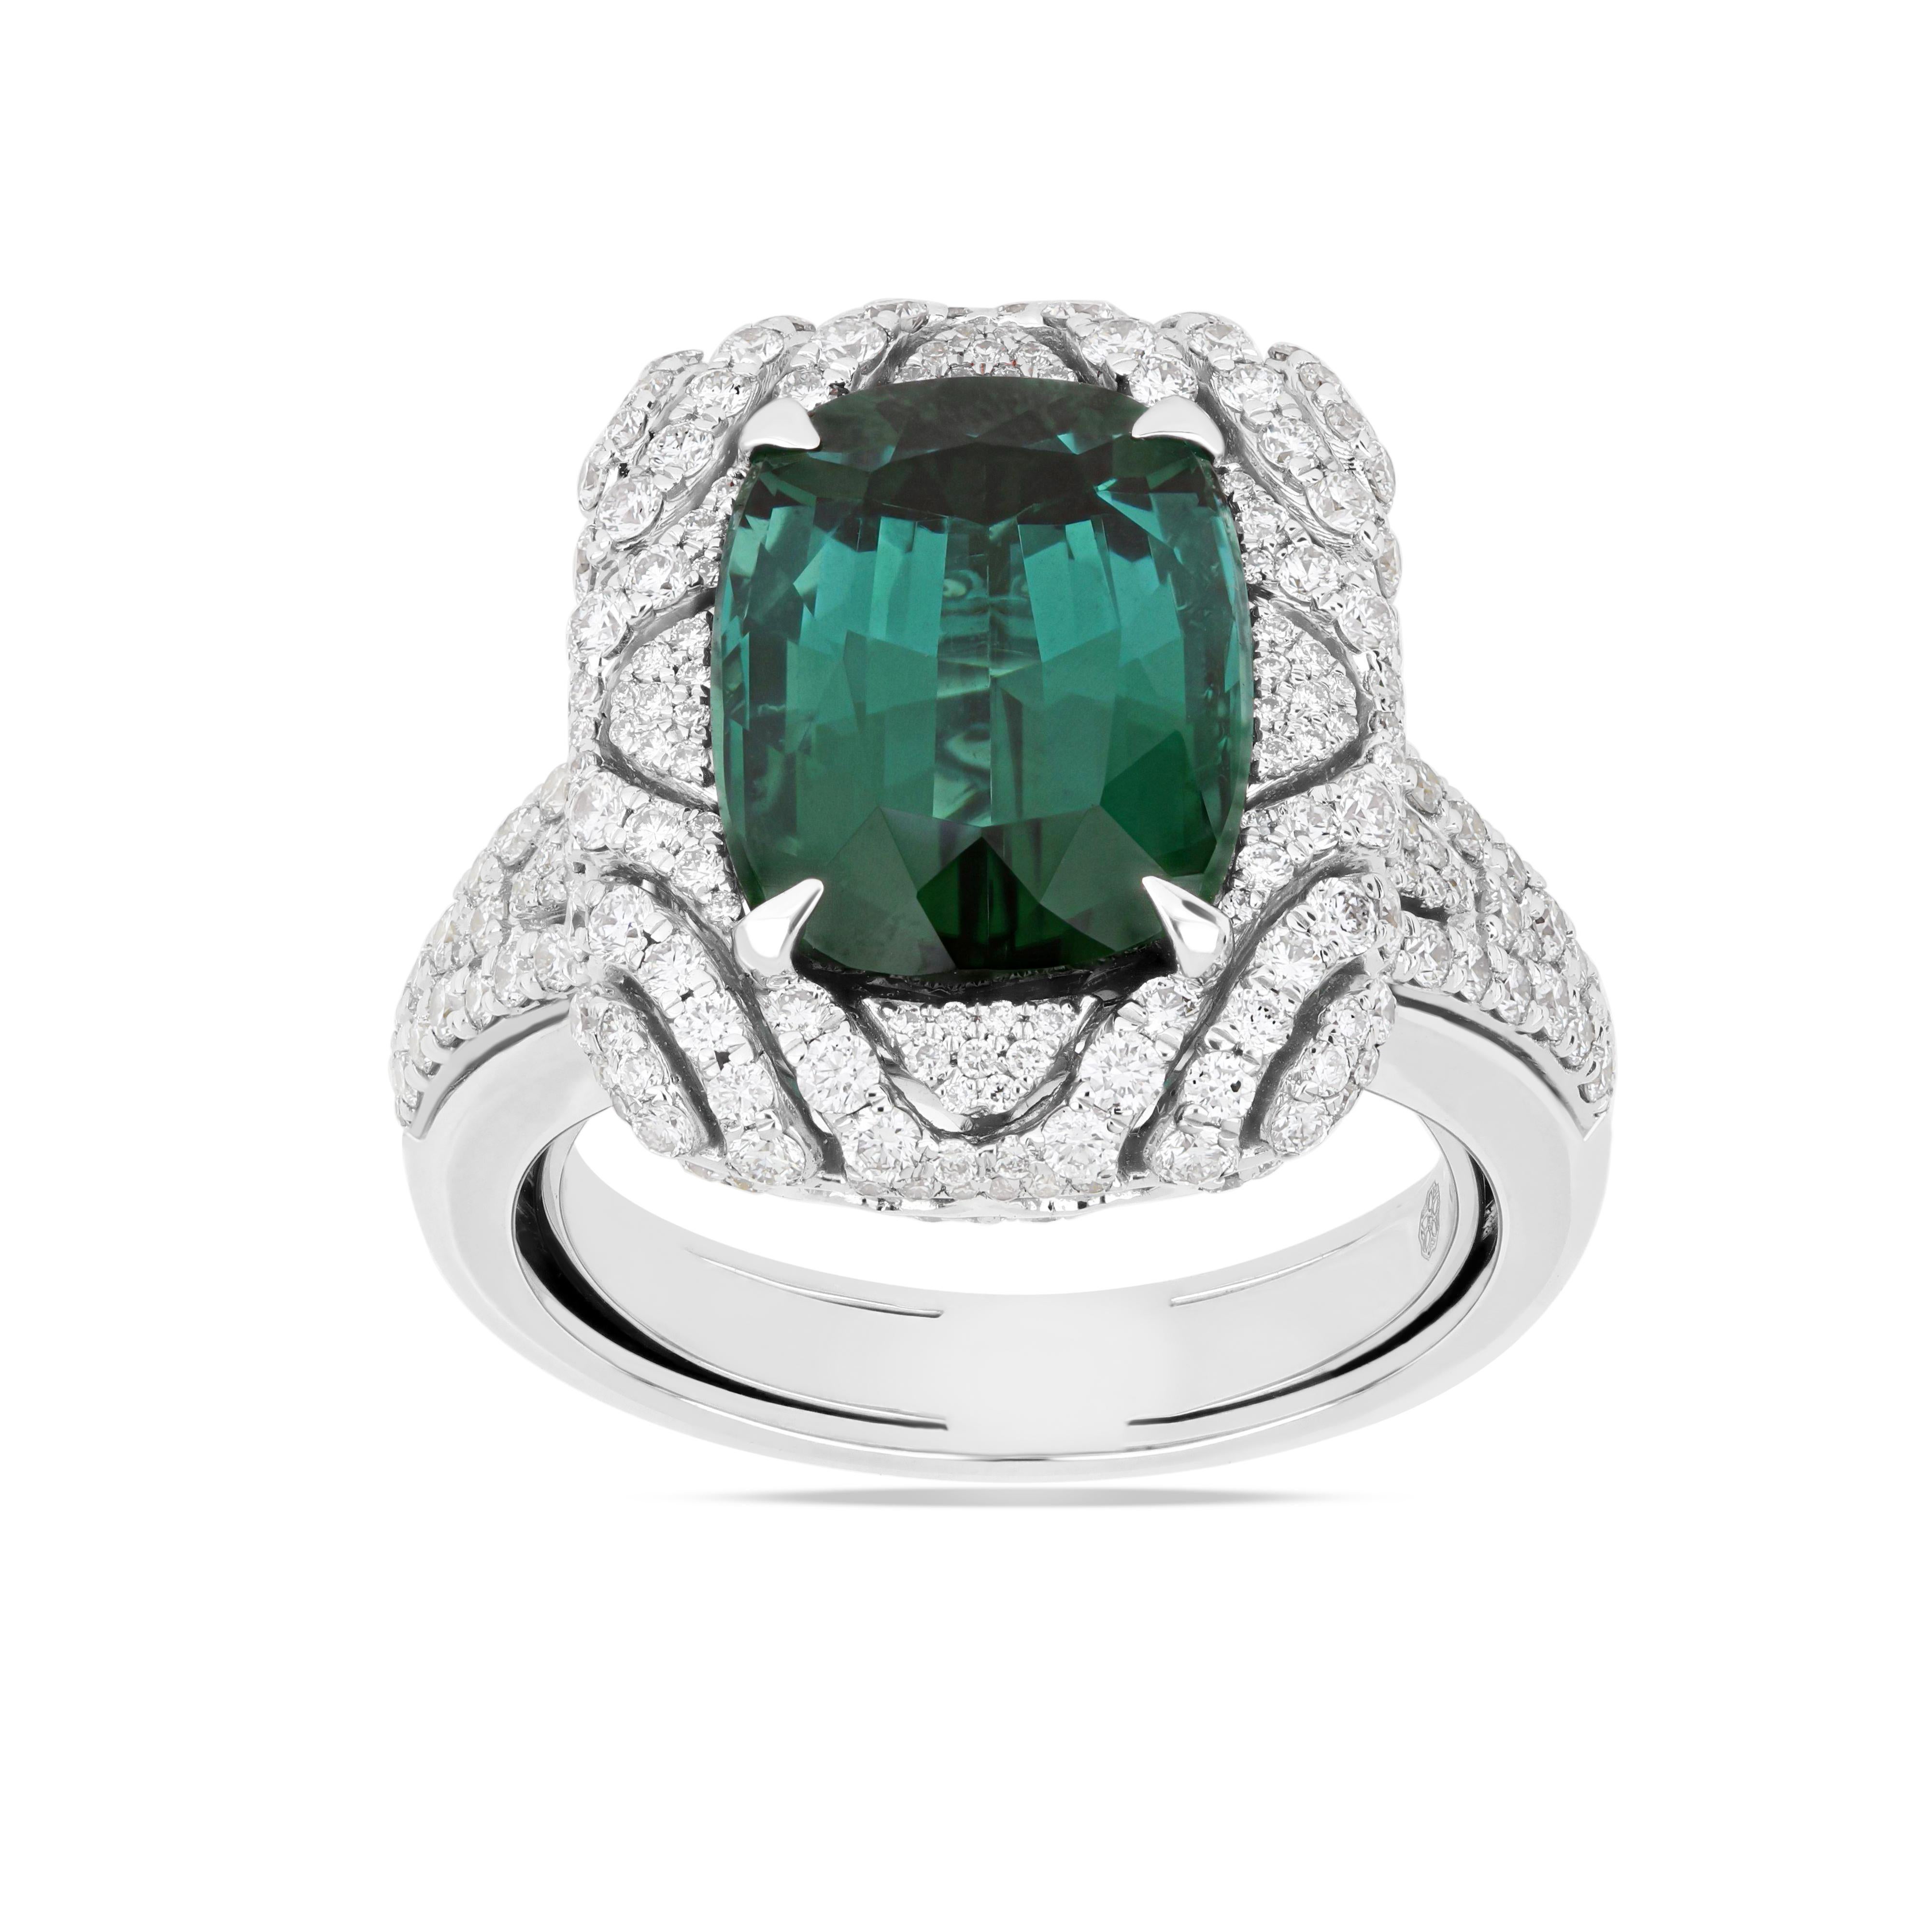 Elegant and exquisitely detailed 18K White Gold Ring, with 8.7 Cts Cushion Round Corner Shape Green Tourmaline set in centre and Surrounded by Micro pave Diamonds, weighing approx. 1.3 CT's. total carat weight and Ring to further enhance the beauty